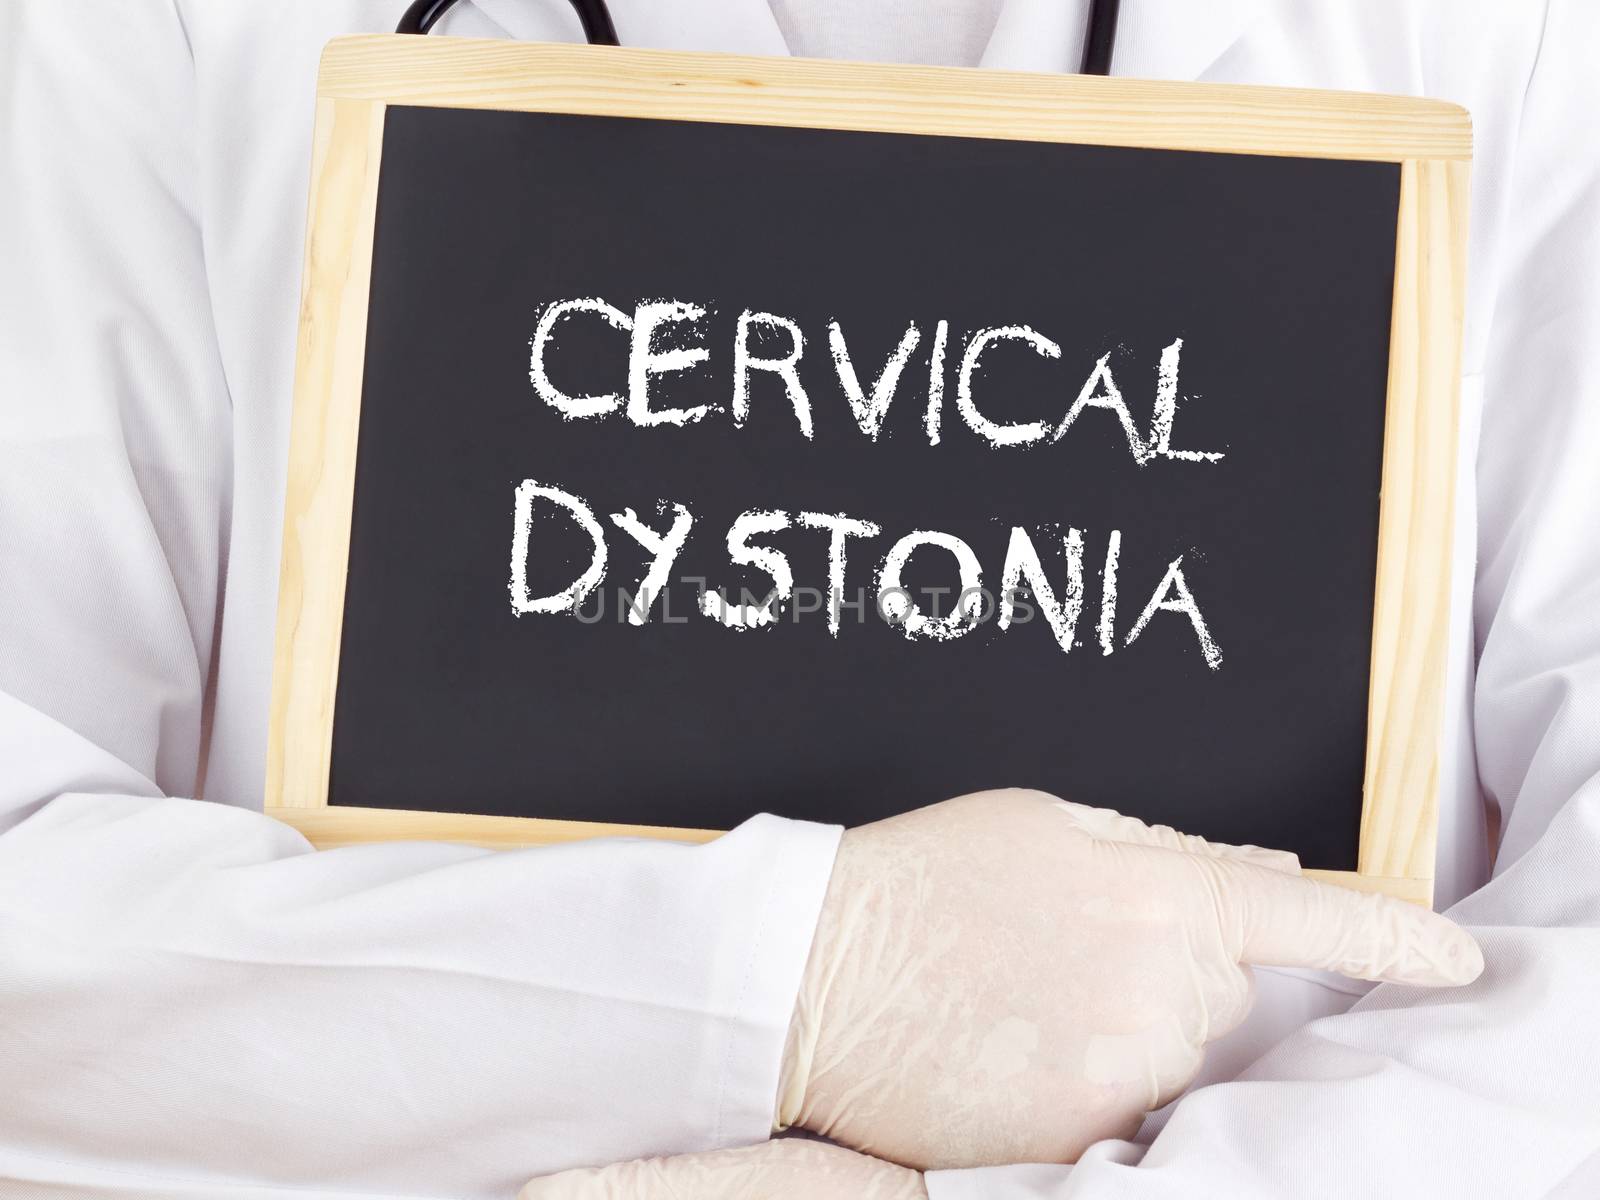 Doctor shows information on blackboard: Cervical dystonia by gwolters